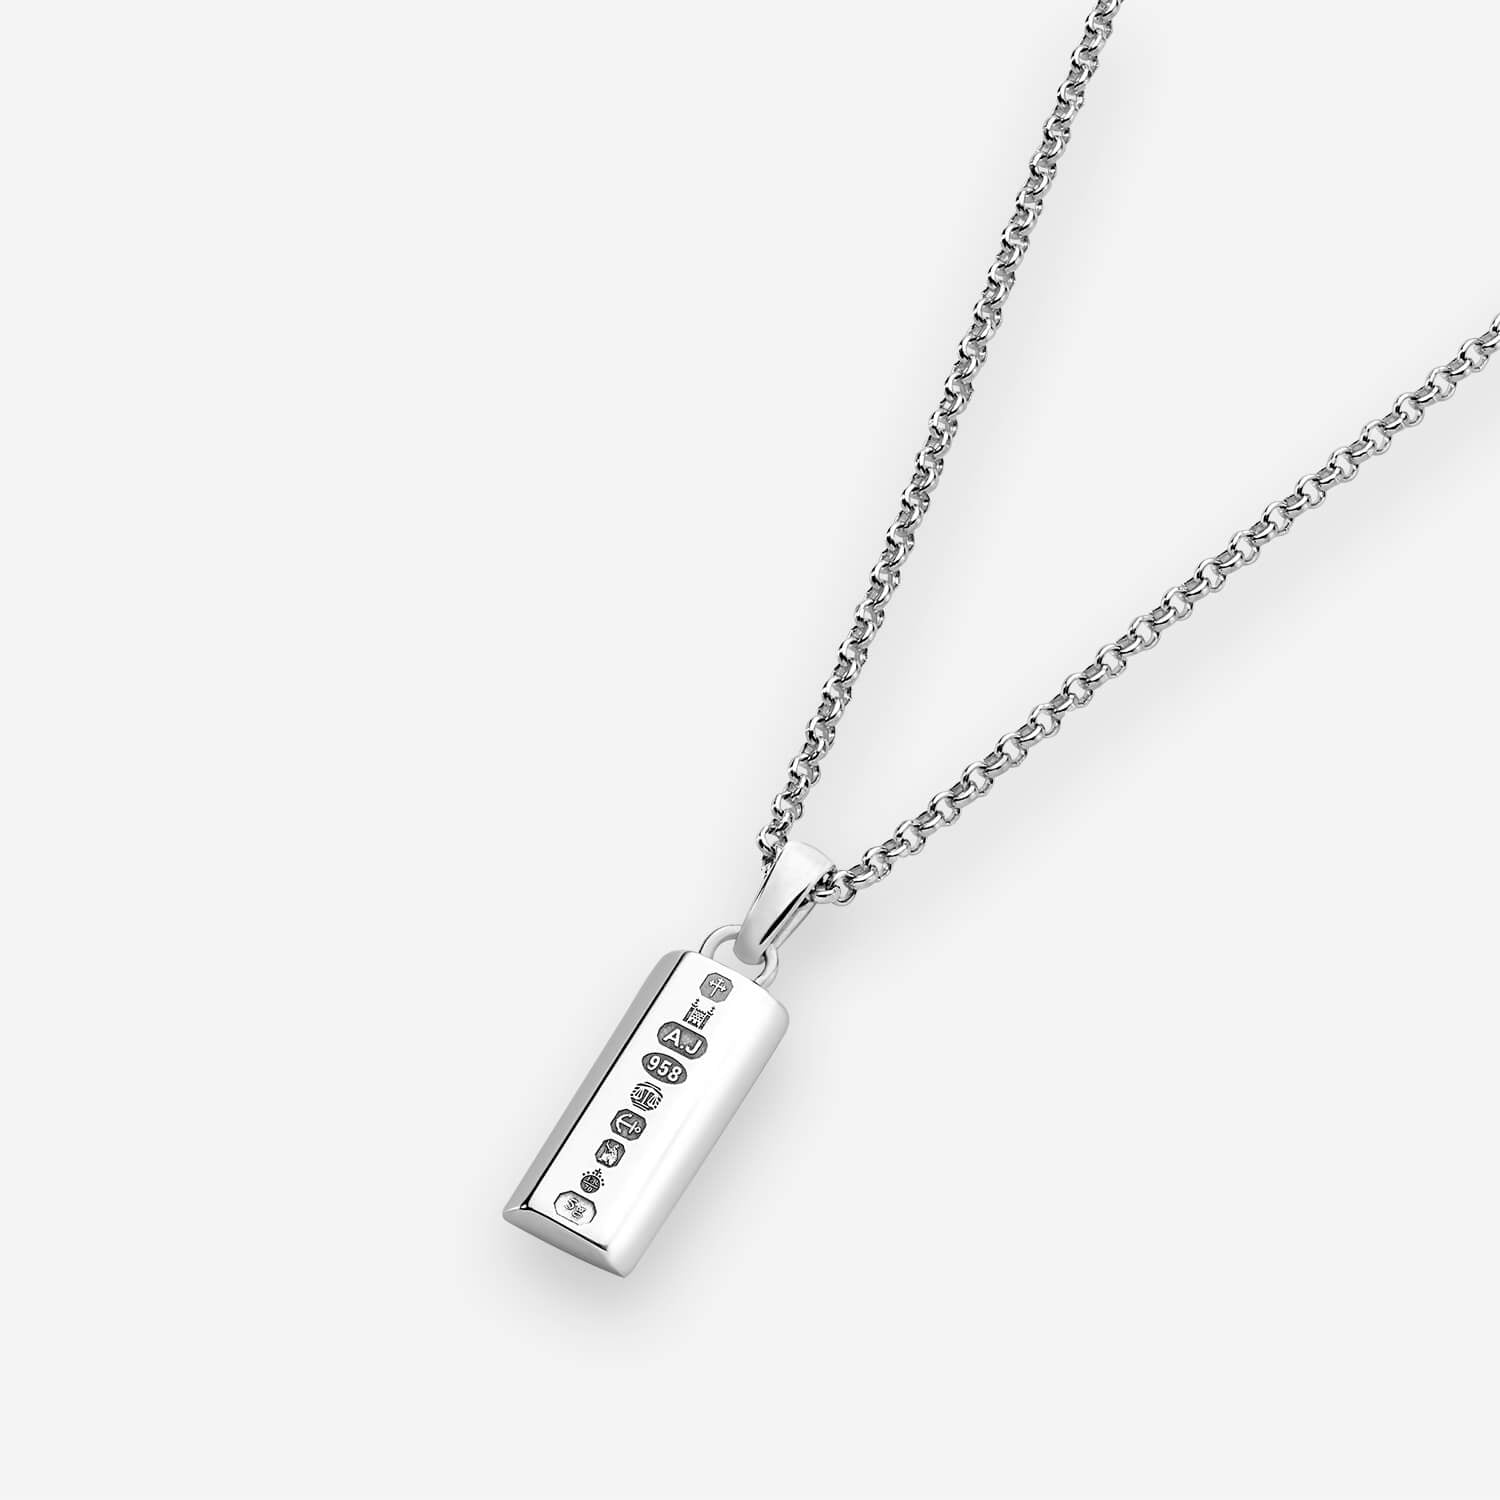 886 Royal Mint Necklaces 886 Bar Pendant with Chain in Sterling Silver